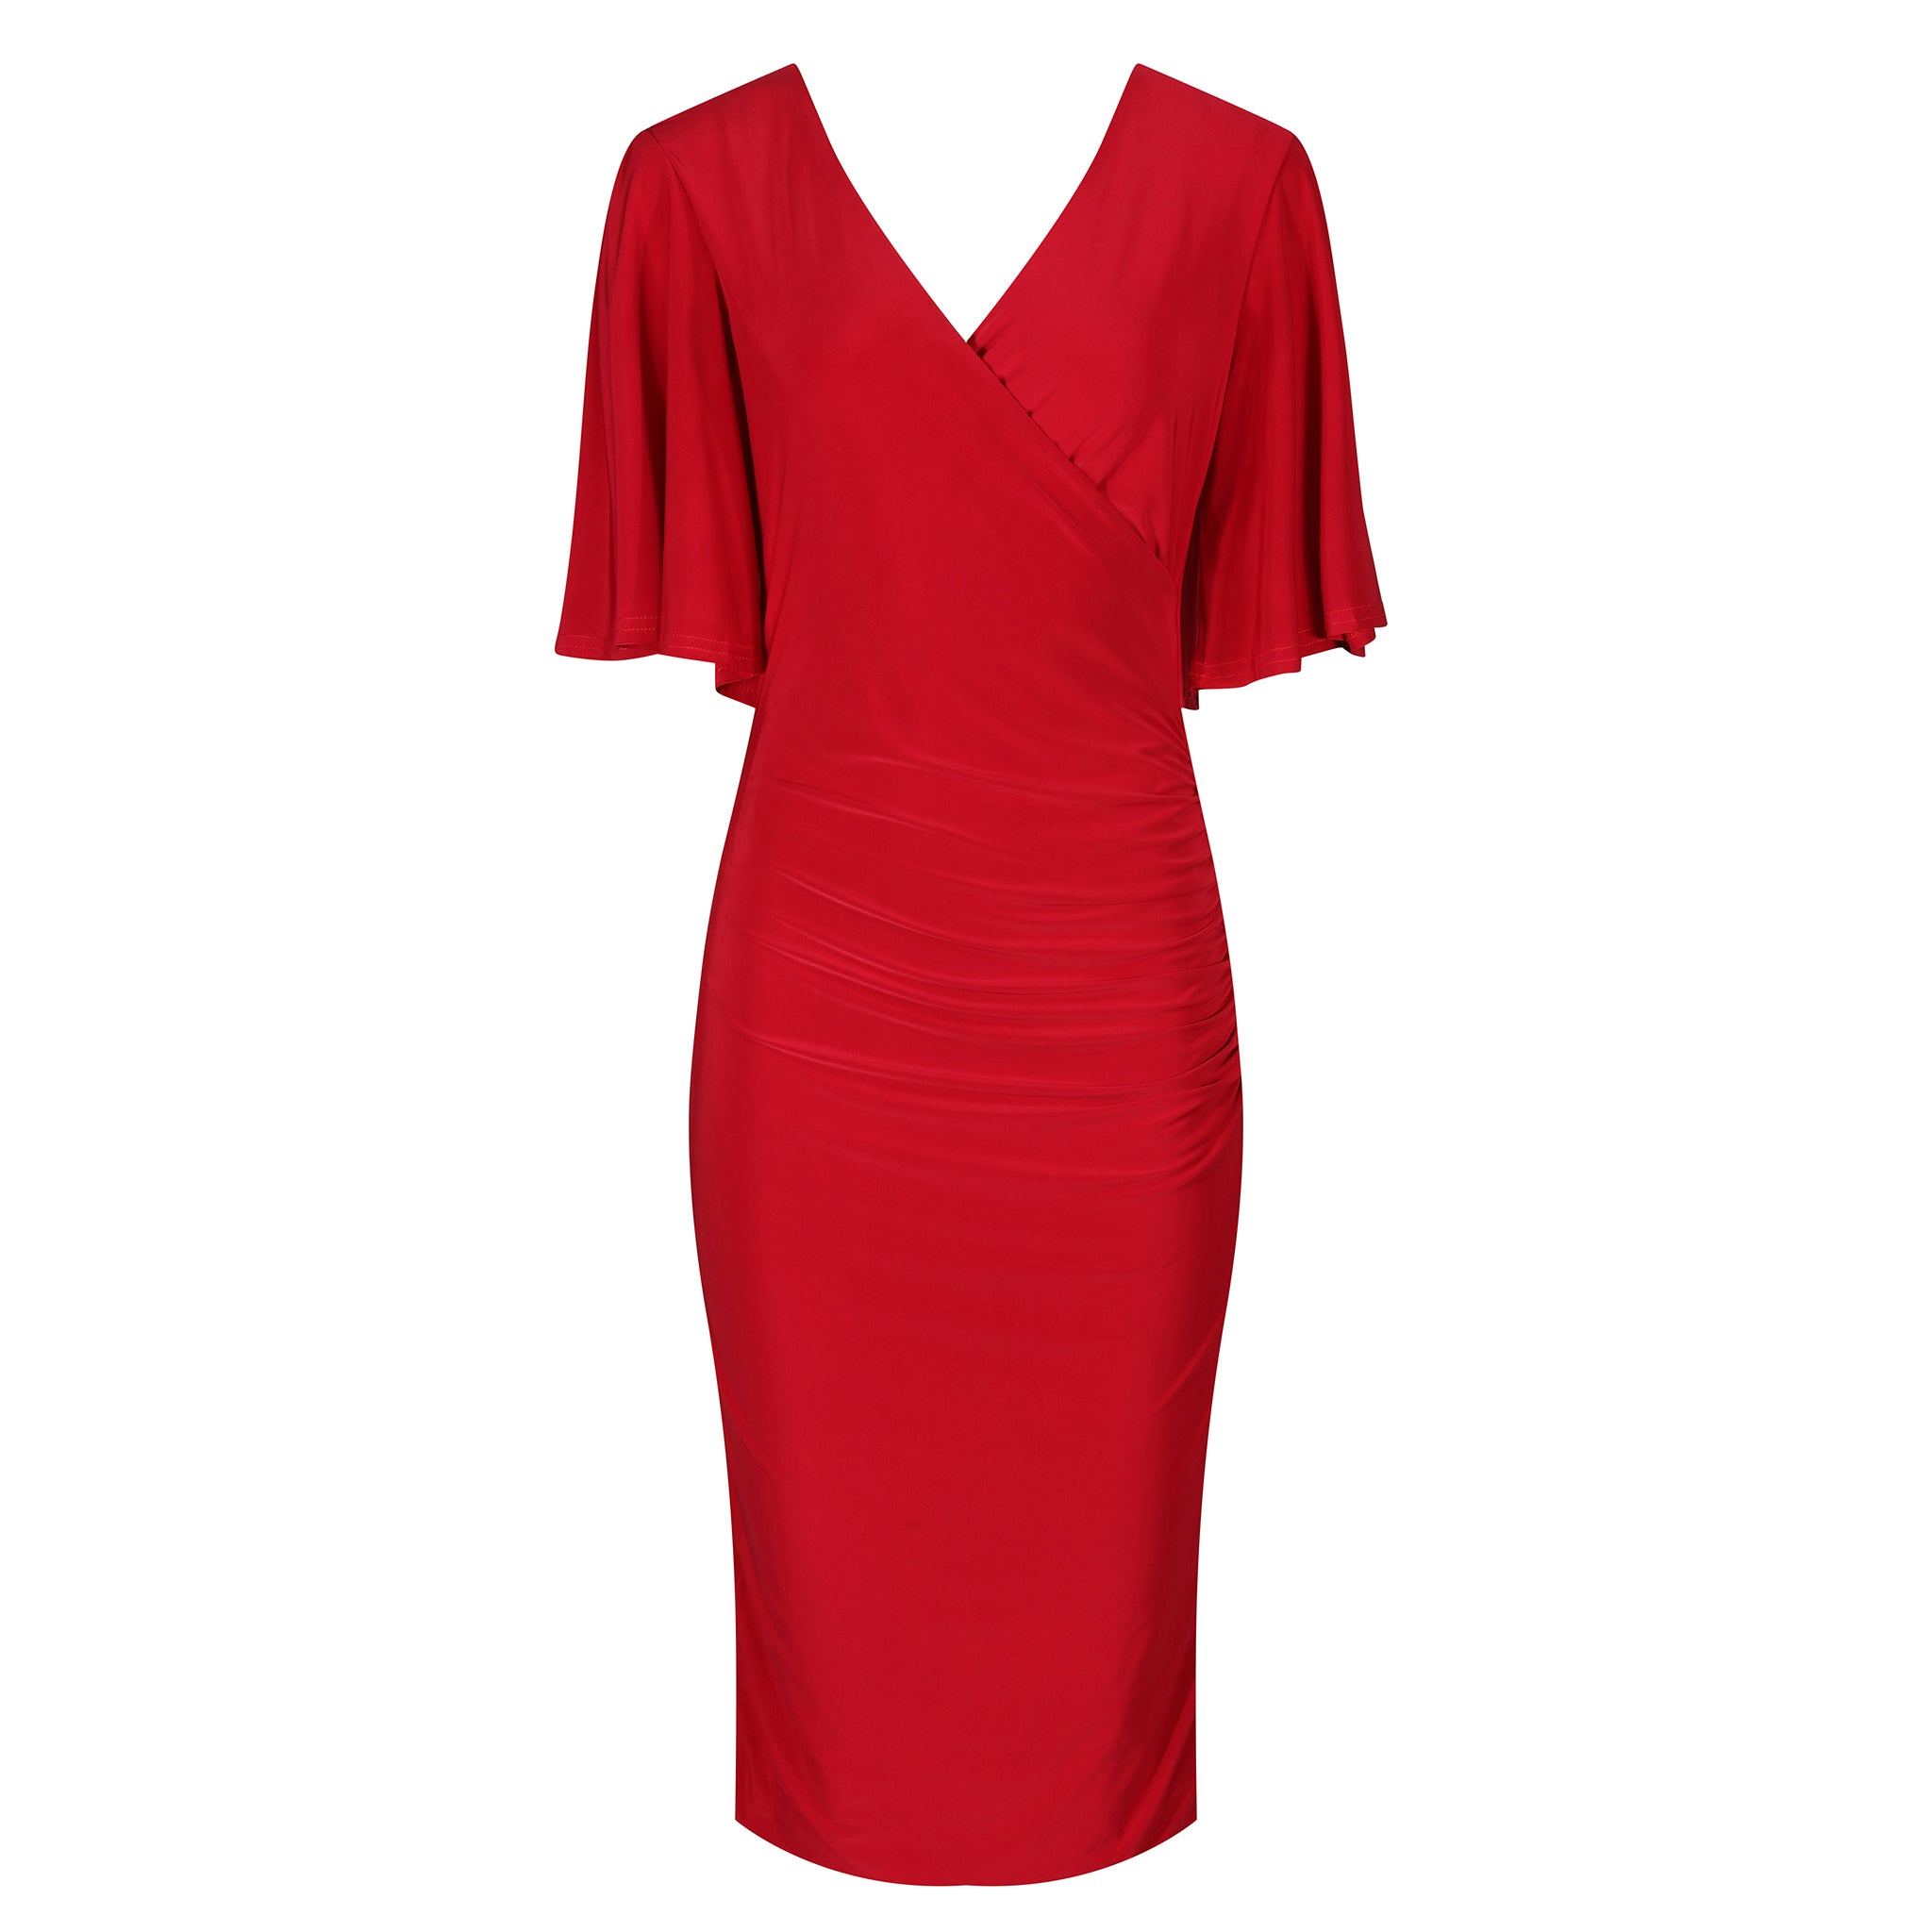 Red Wrap Top Slinky Cocktail Wiggle Dress w/ Butterfly Sleeves